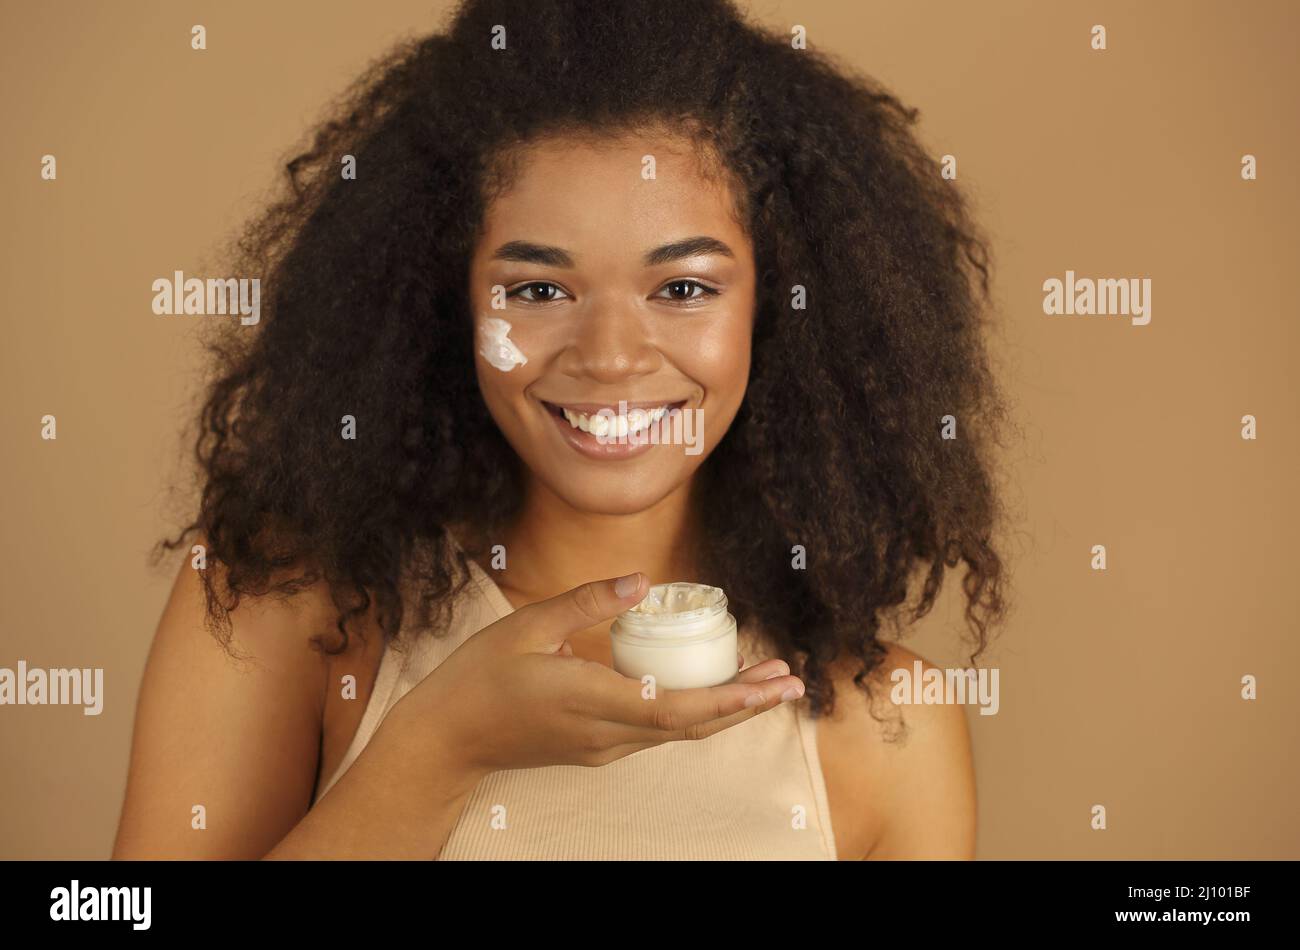 Close up shot of smiling dark skinned woman with curly afro hair applying face cream Stock Photo